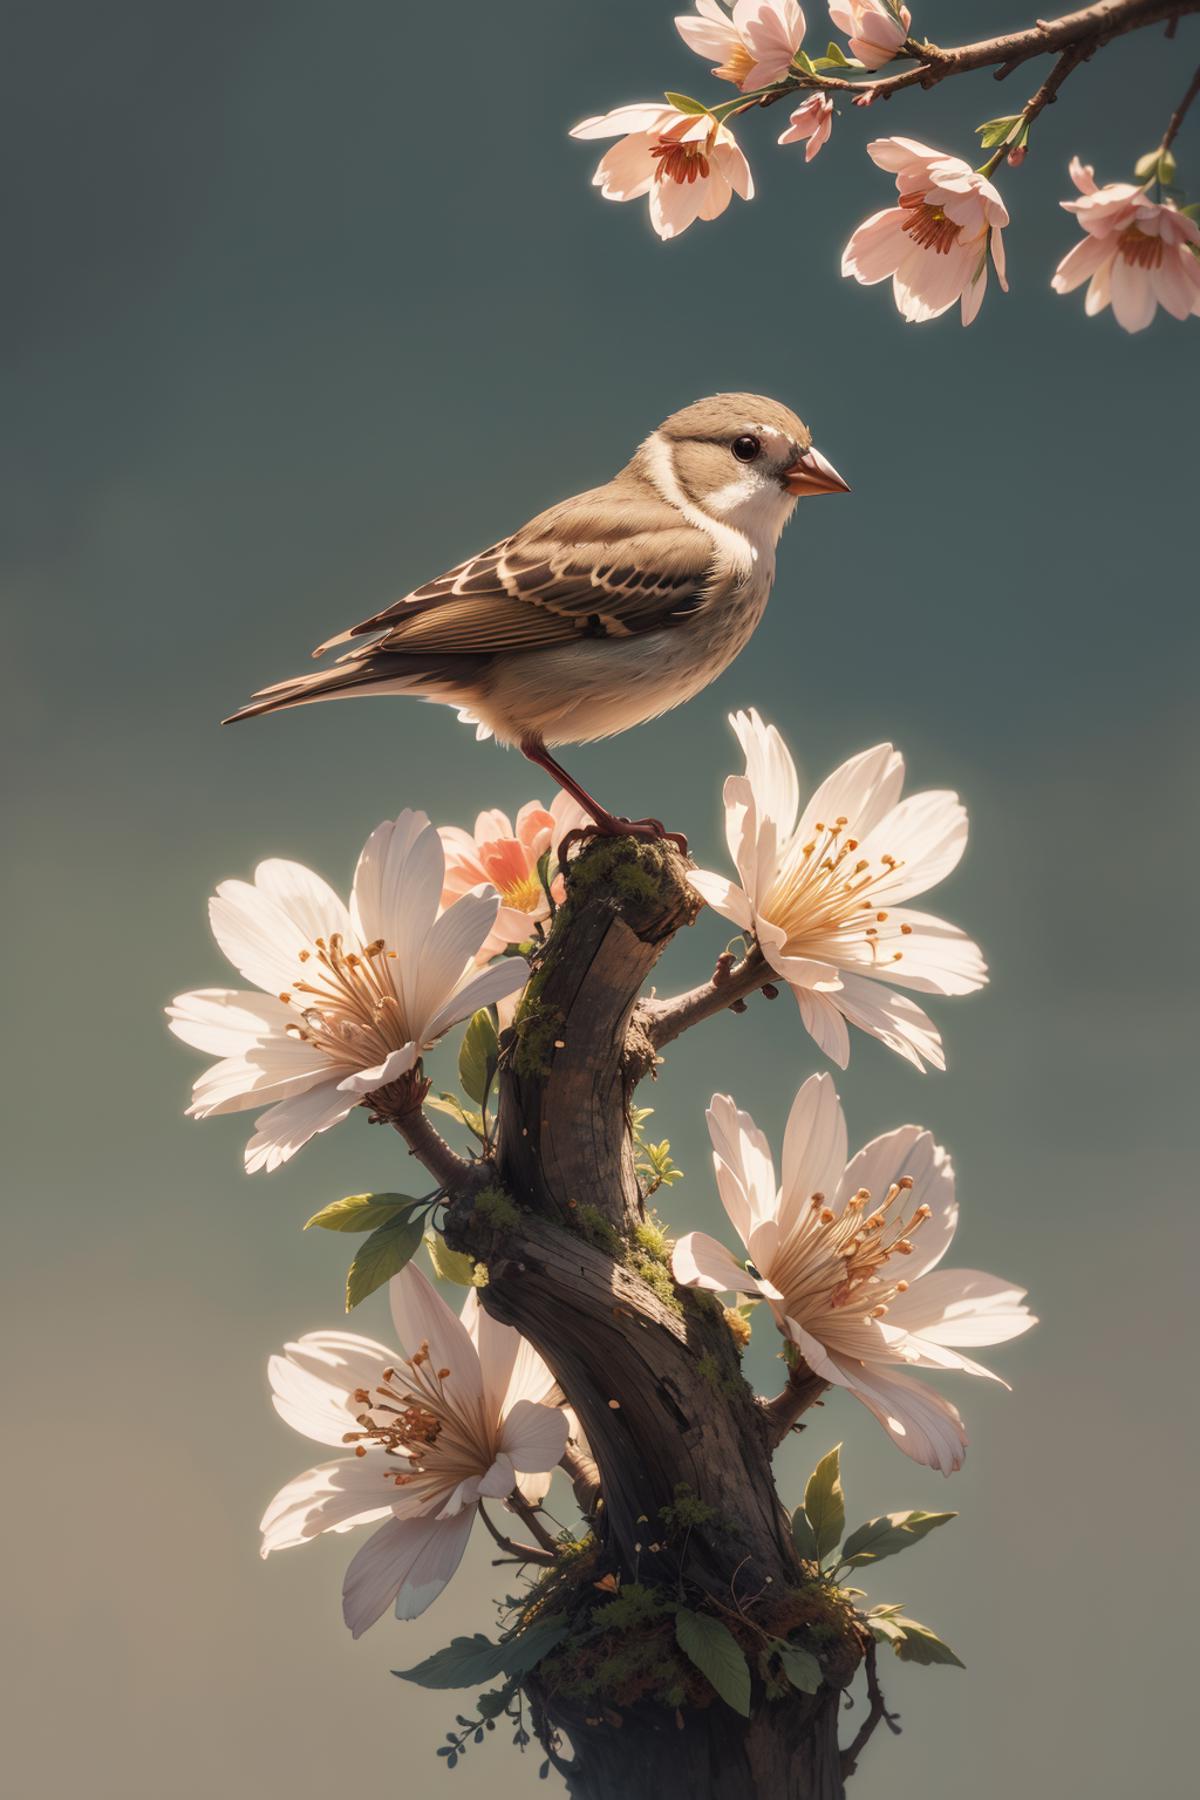 a tiny finch on a branch with spring flowers on background:1.0, aesthetically inspired by Evelyn De Morgan, art by Bill Si...